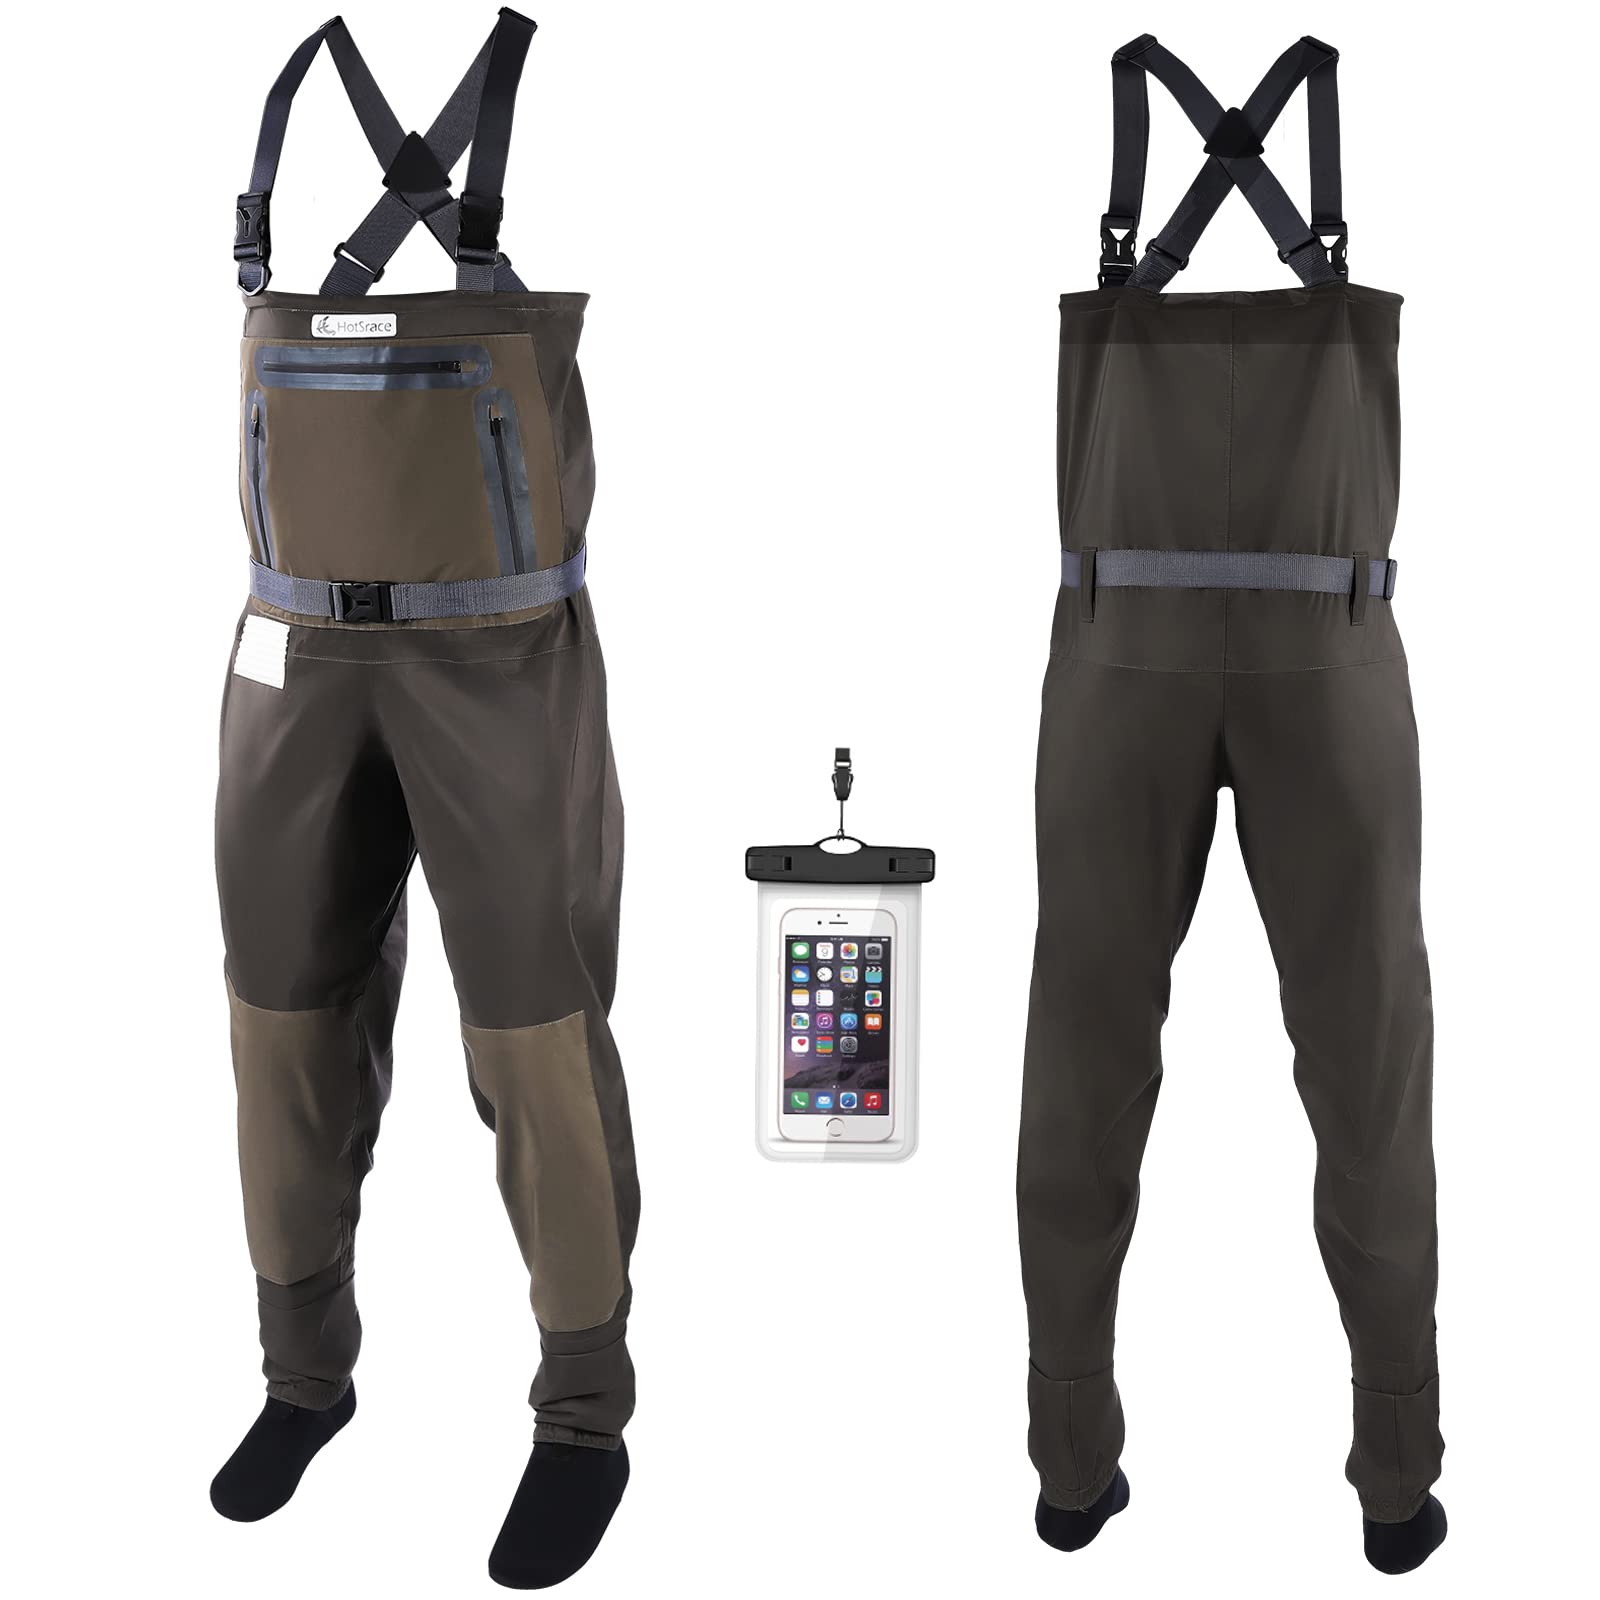 Fishing Chest Waders Nylon Chest Waders Fishing Waders for Men